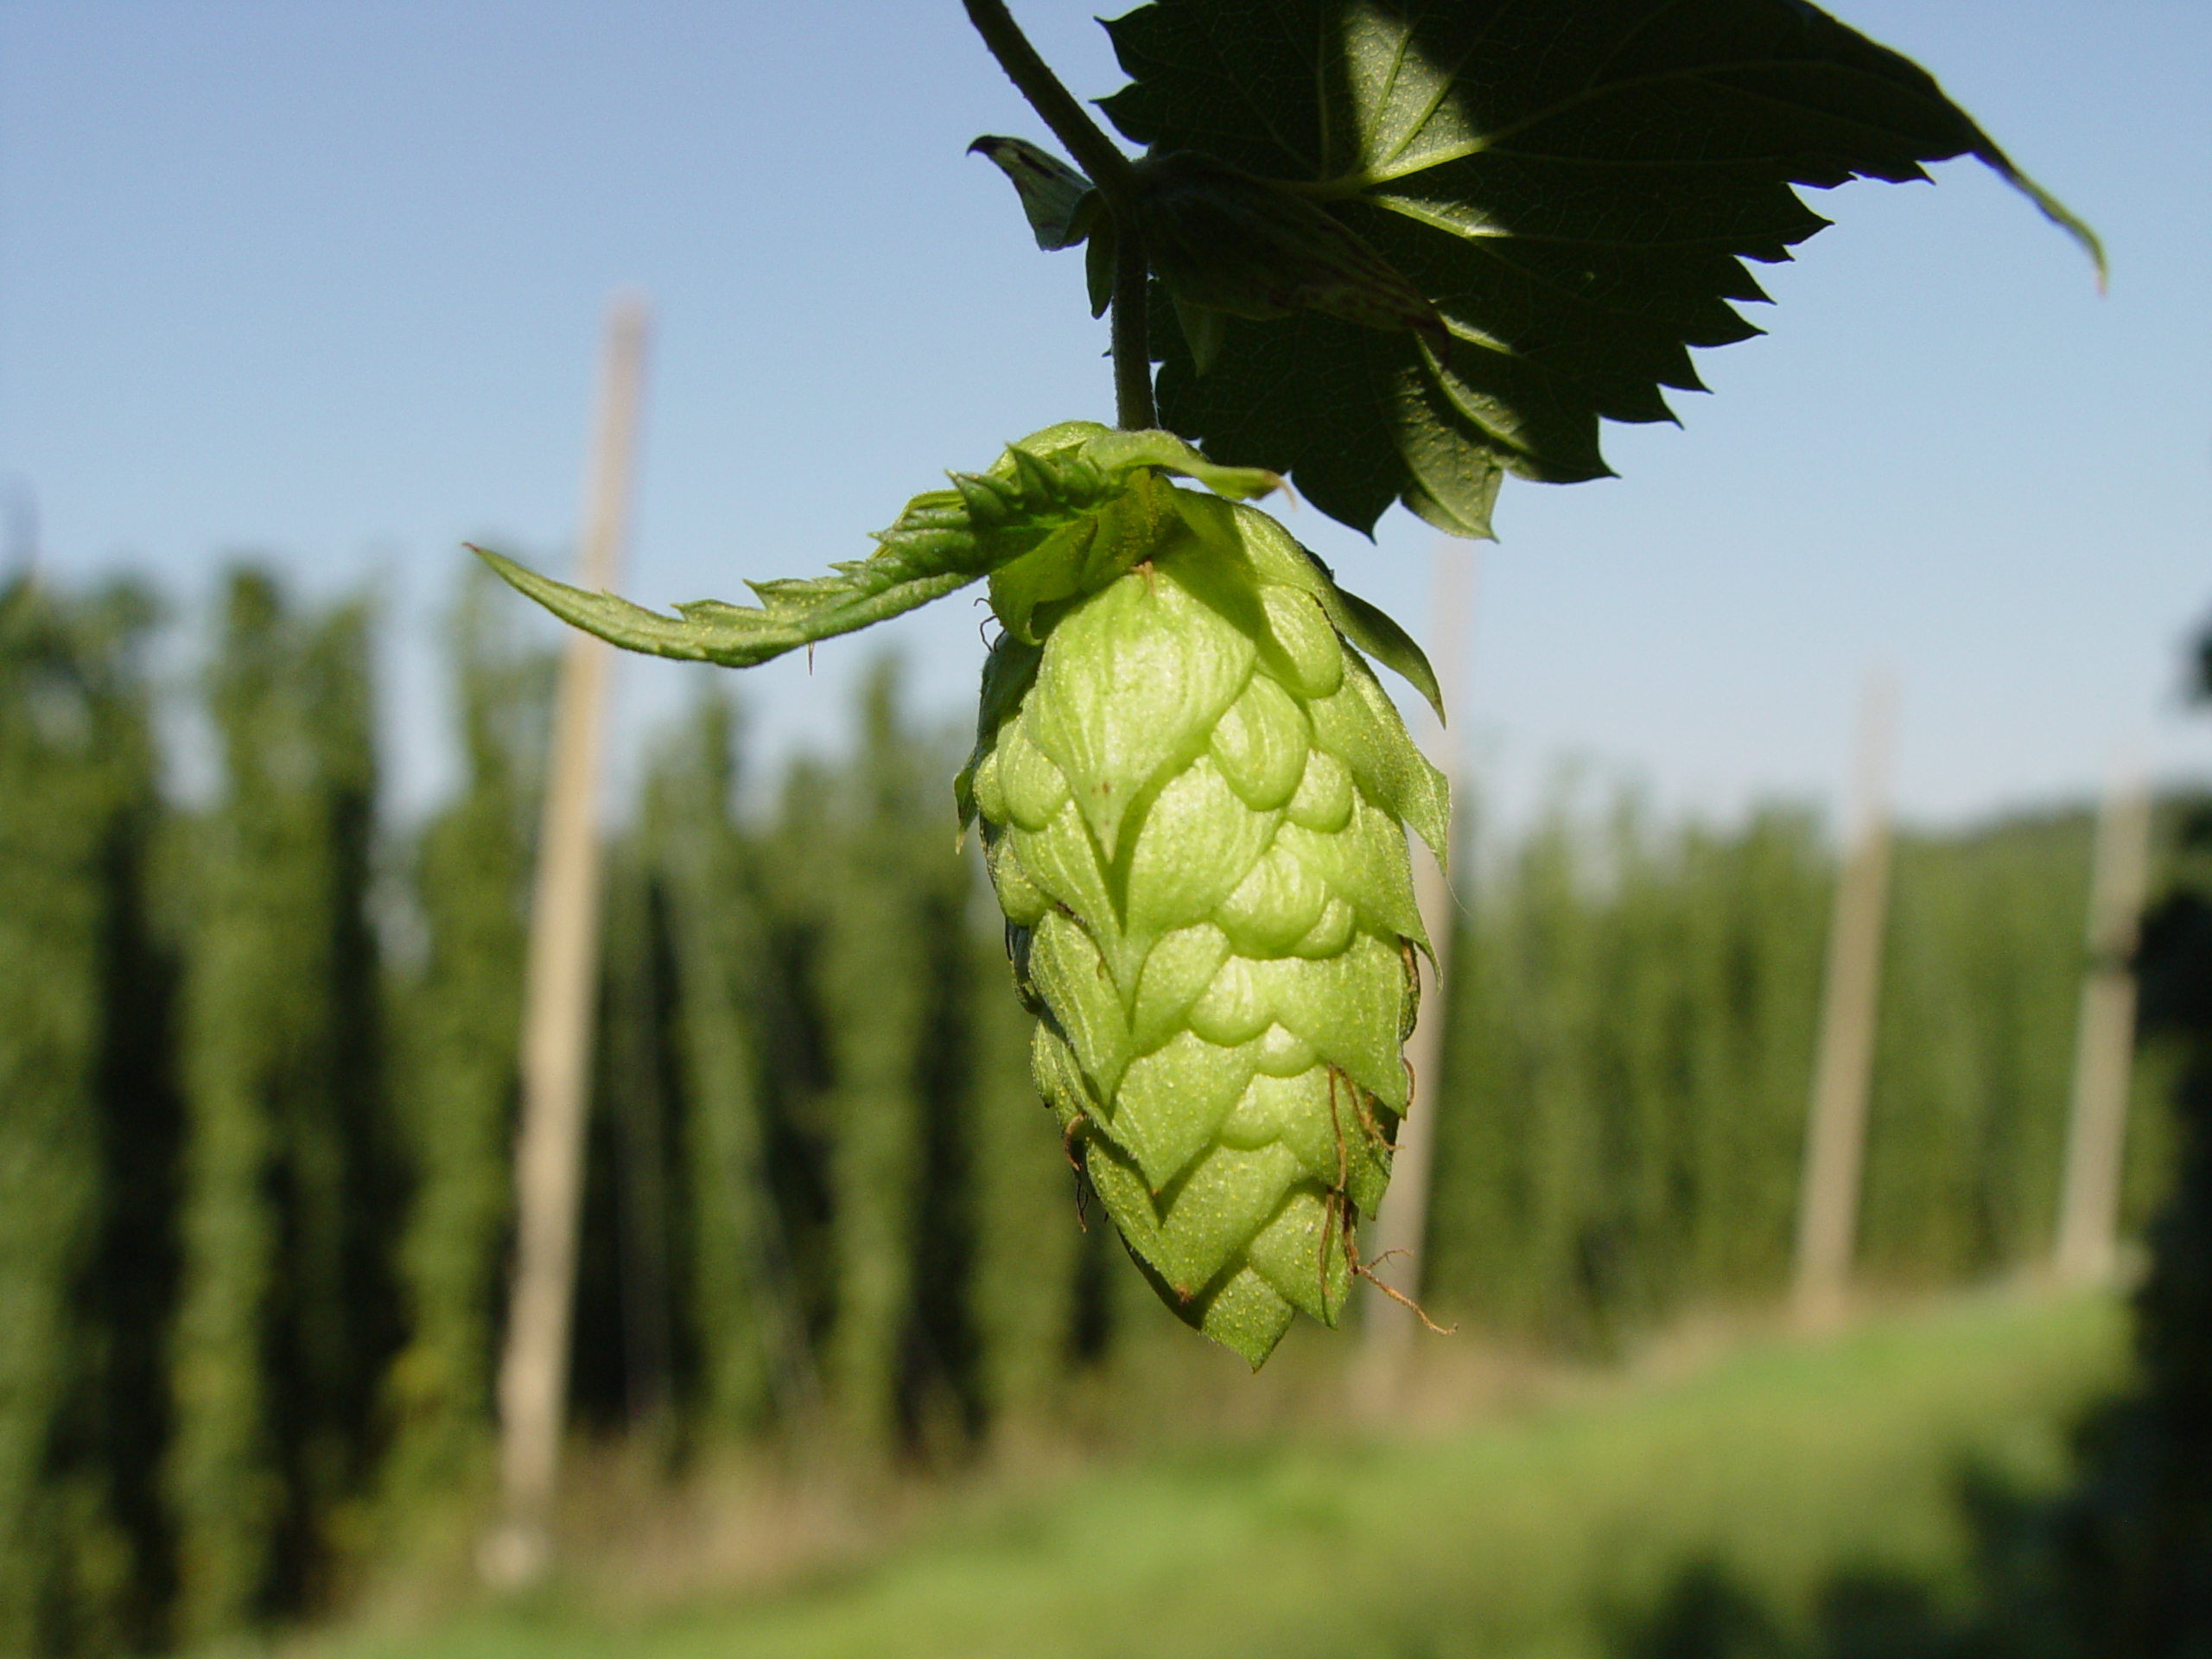 national beer day cover photo showing a close up image of a hop.